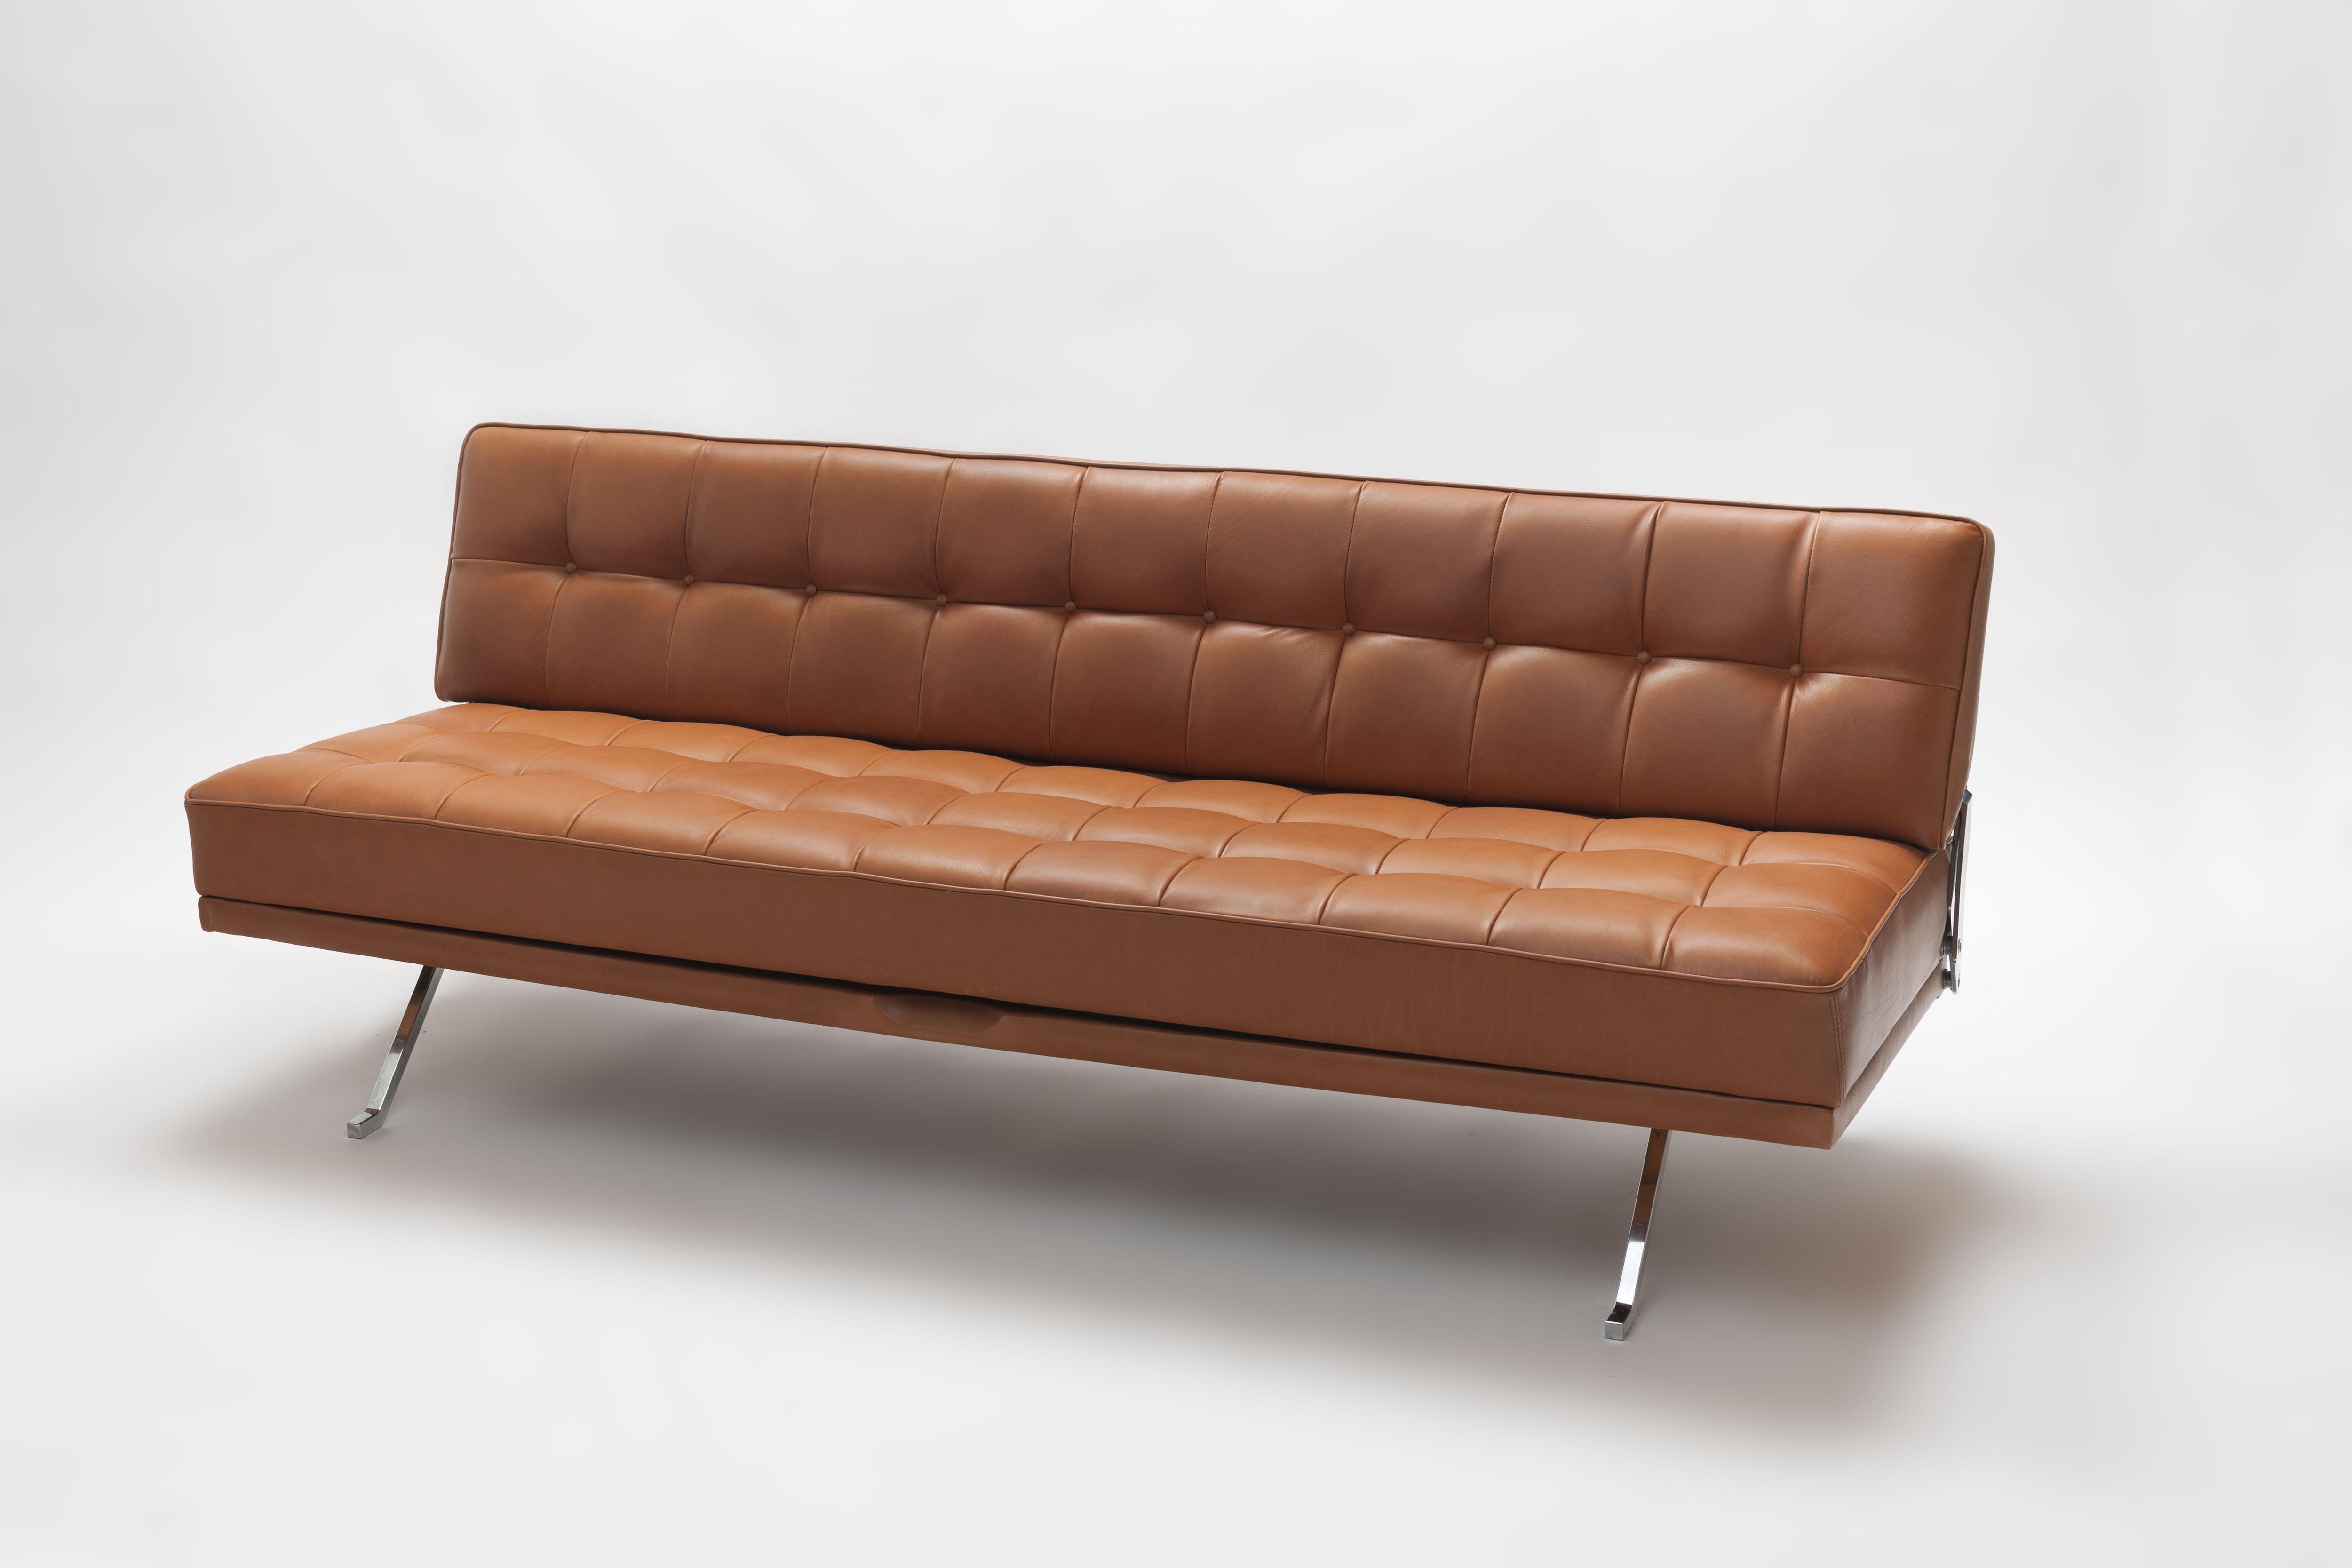 Constanze sofa daybed by Austrian architect and designer Johannes Spalt is a smart and iconic design from the 1960's. By one hand movement the sofa turns into a very comfortable daybed. A ingenious, beautiful and high quality technique and